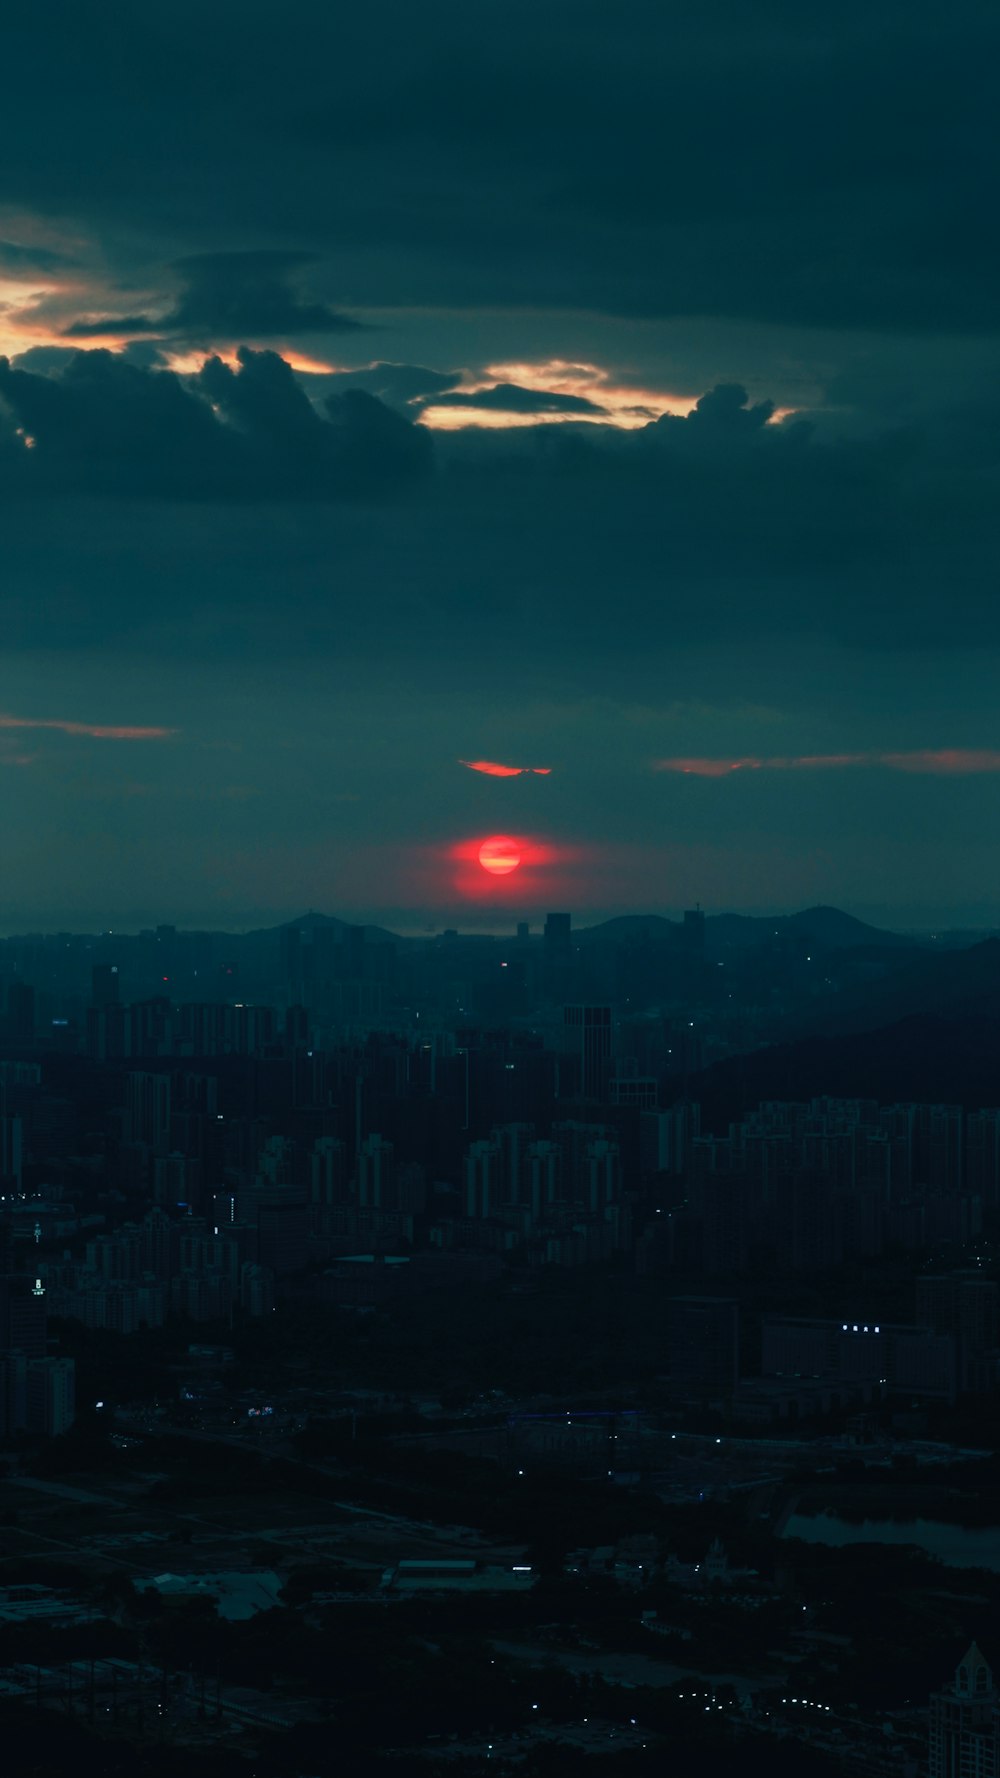 the sun is setting over a large city